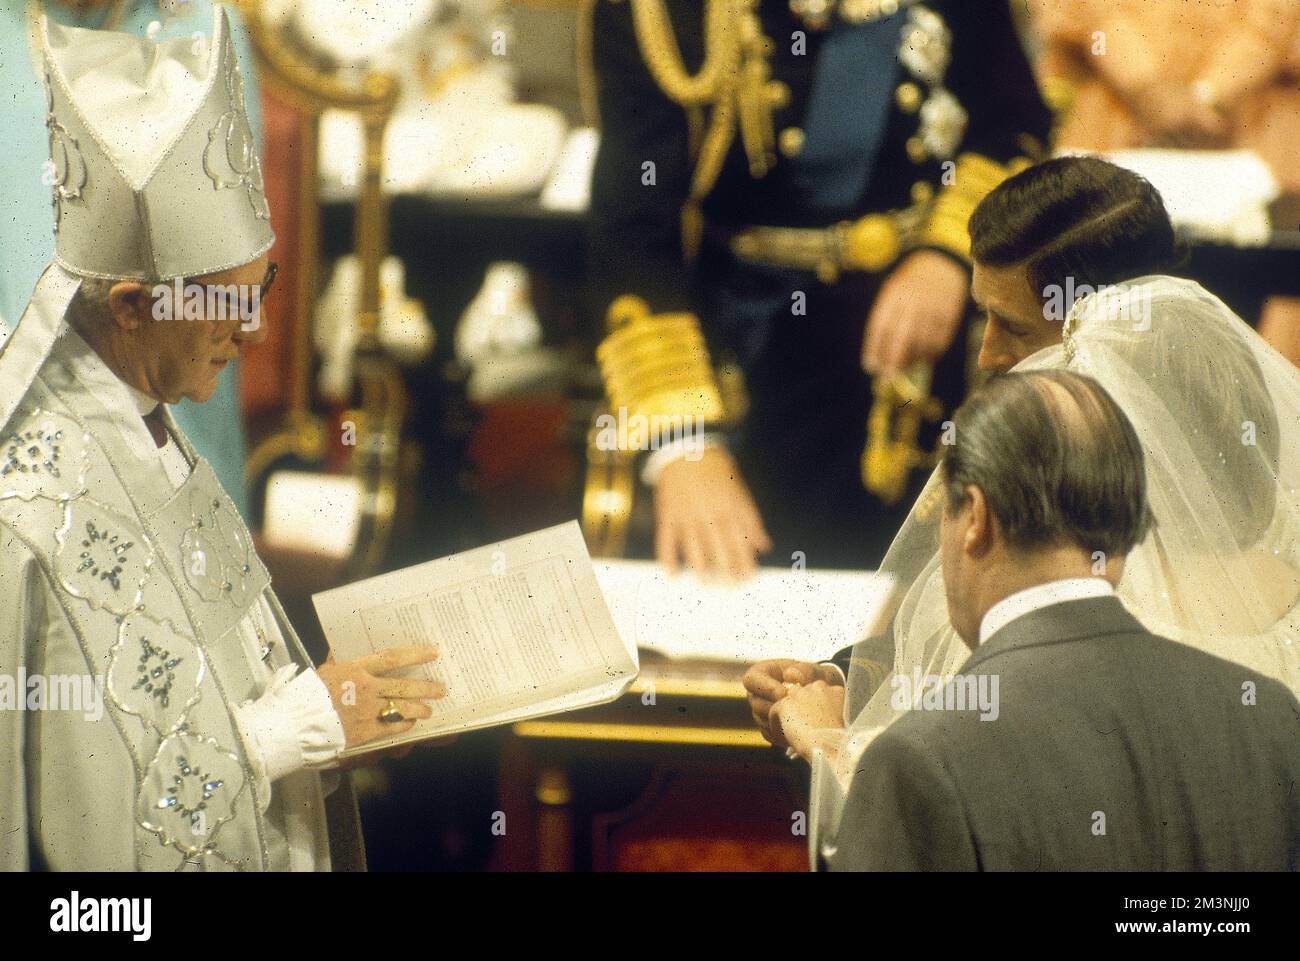 Marriage of Prince Charles to Lady Diana Spencer in St Paul's Cathedral on 29 July 1981.  The couple exchange rings under the watchful eye of the bride's father, Earl Spencer.  The ceremony was conducted by the Archbishop of Canterbury, Robert Runcie.     Date: 1981 Stock Photo